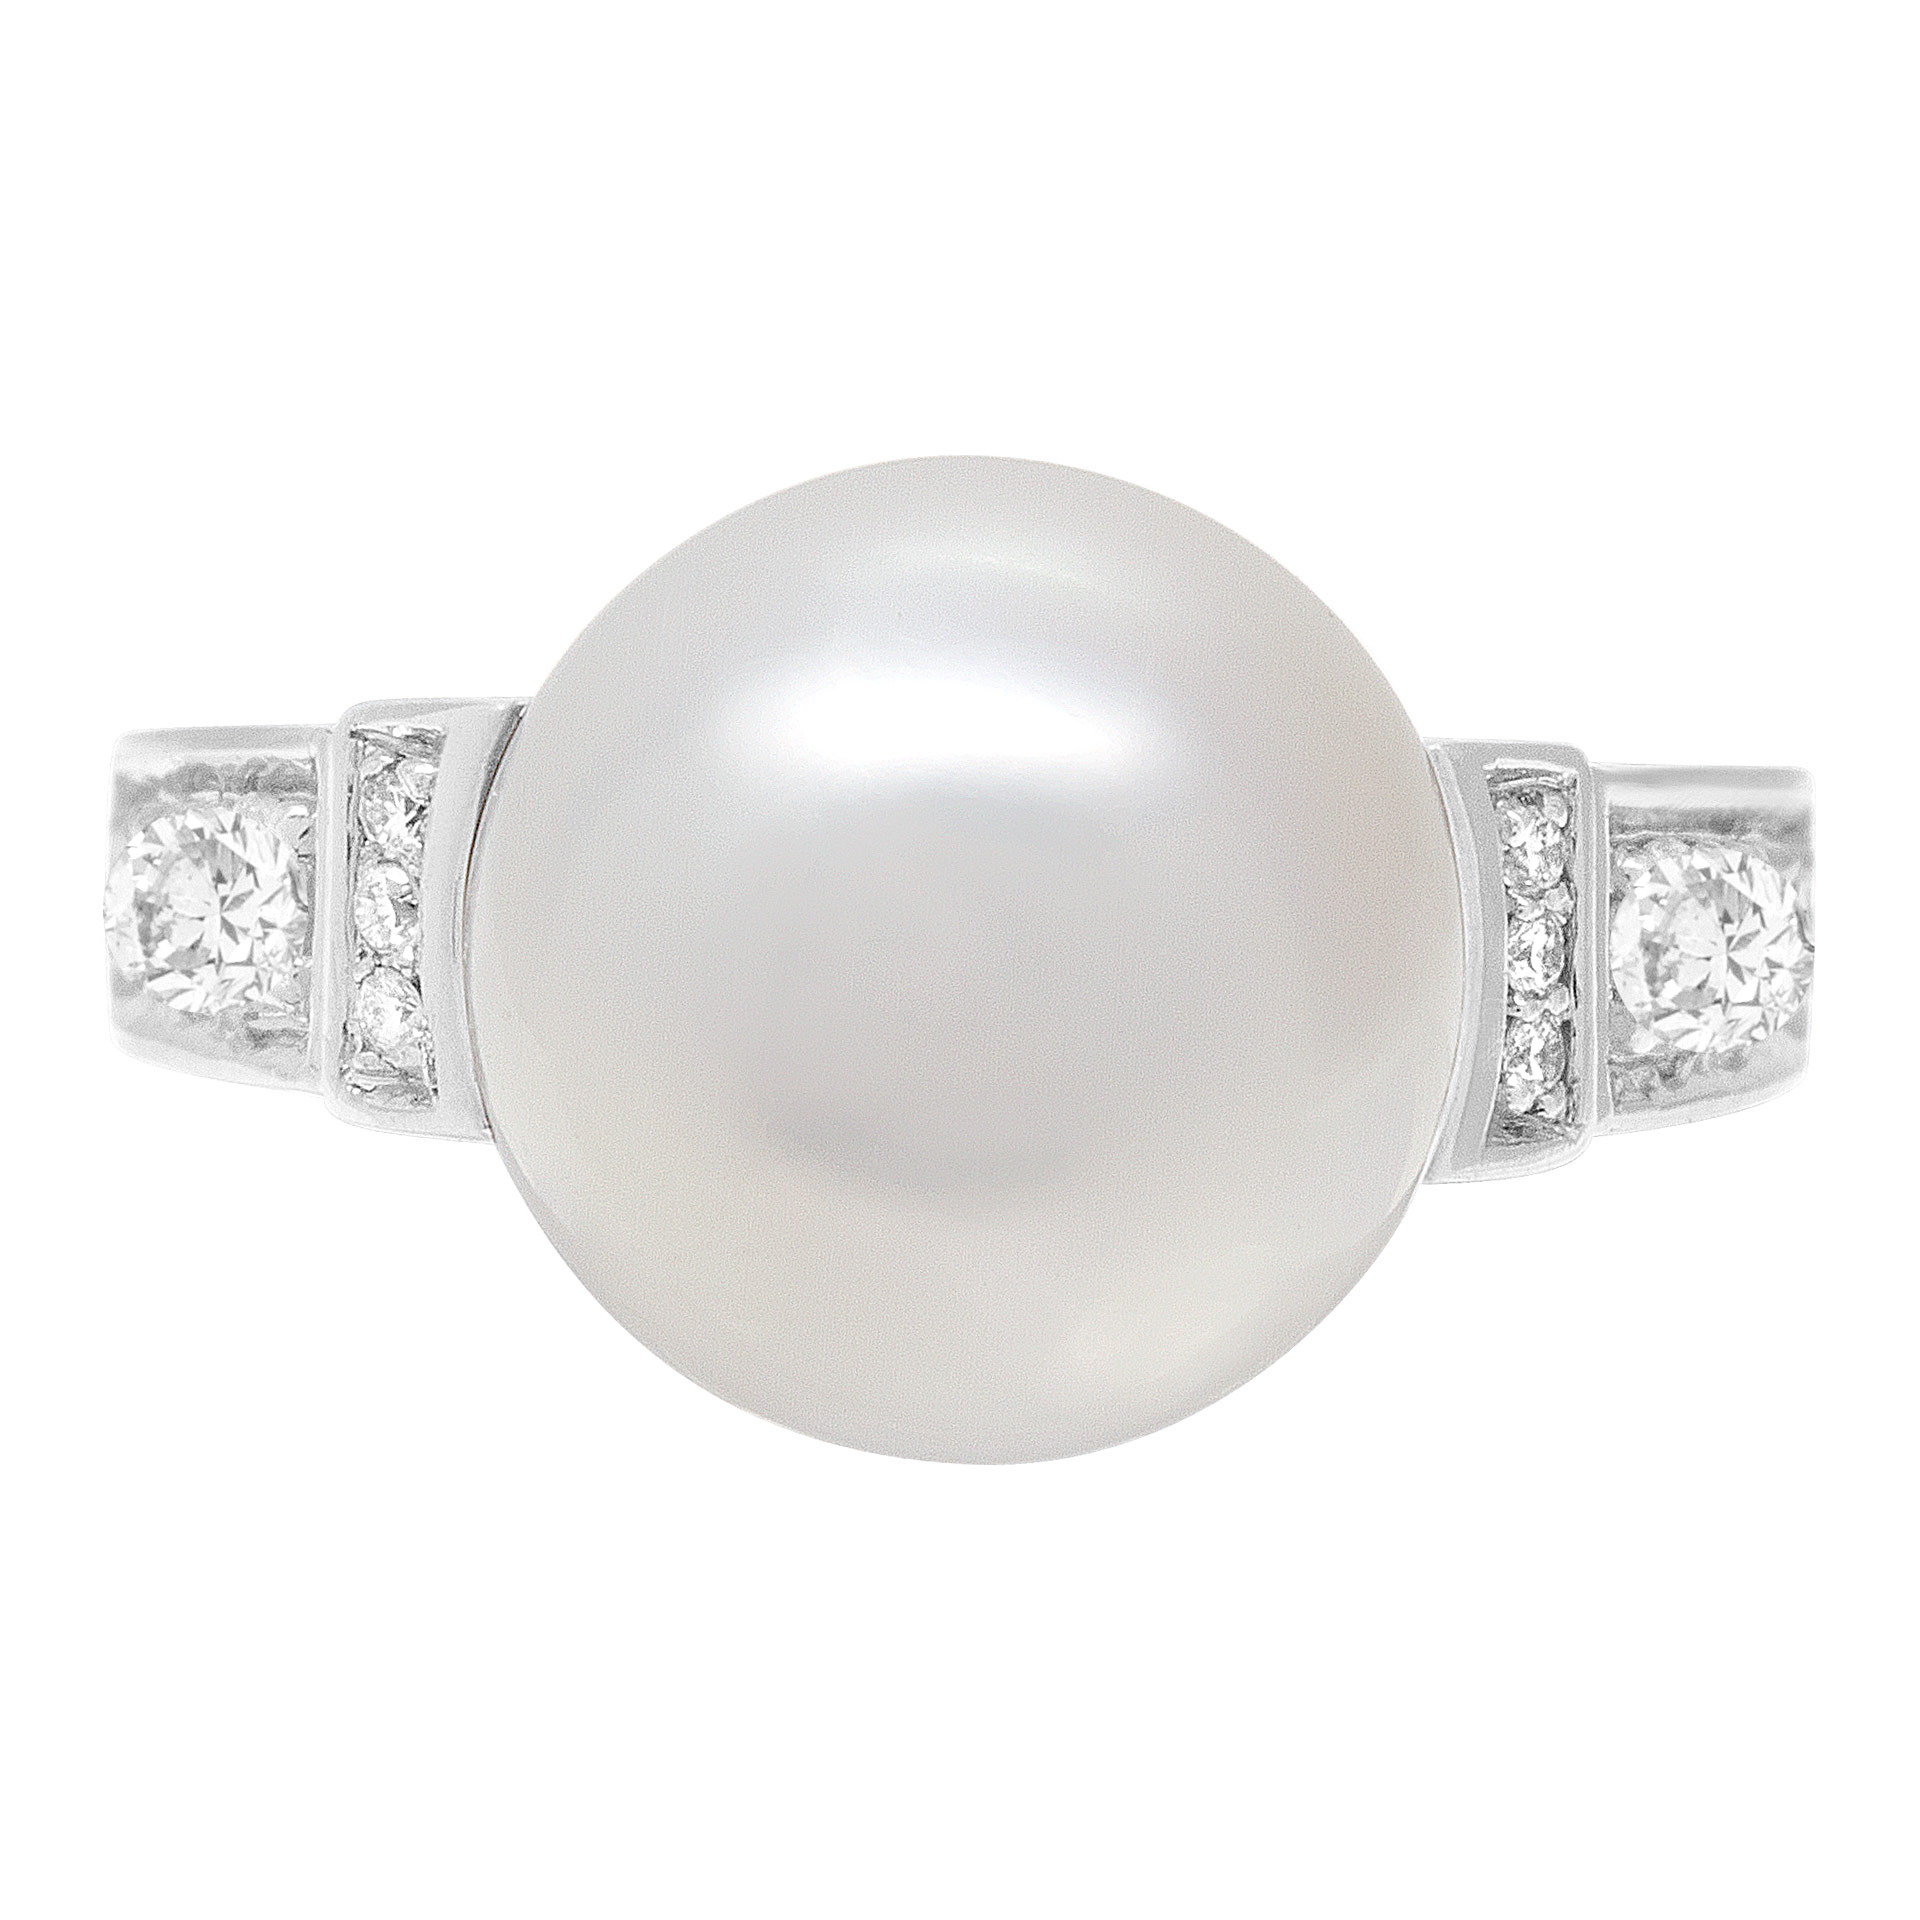 South Sea 12 mm pearl and diamond ring in 18k white gold. 0.54cts in diamonds